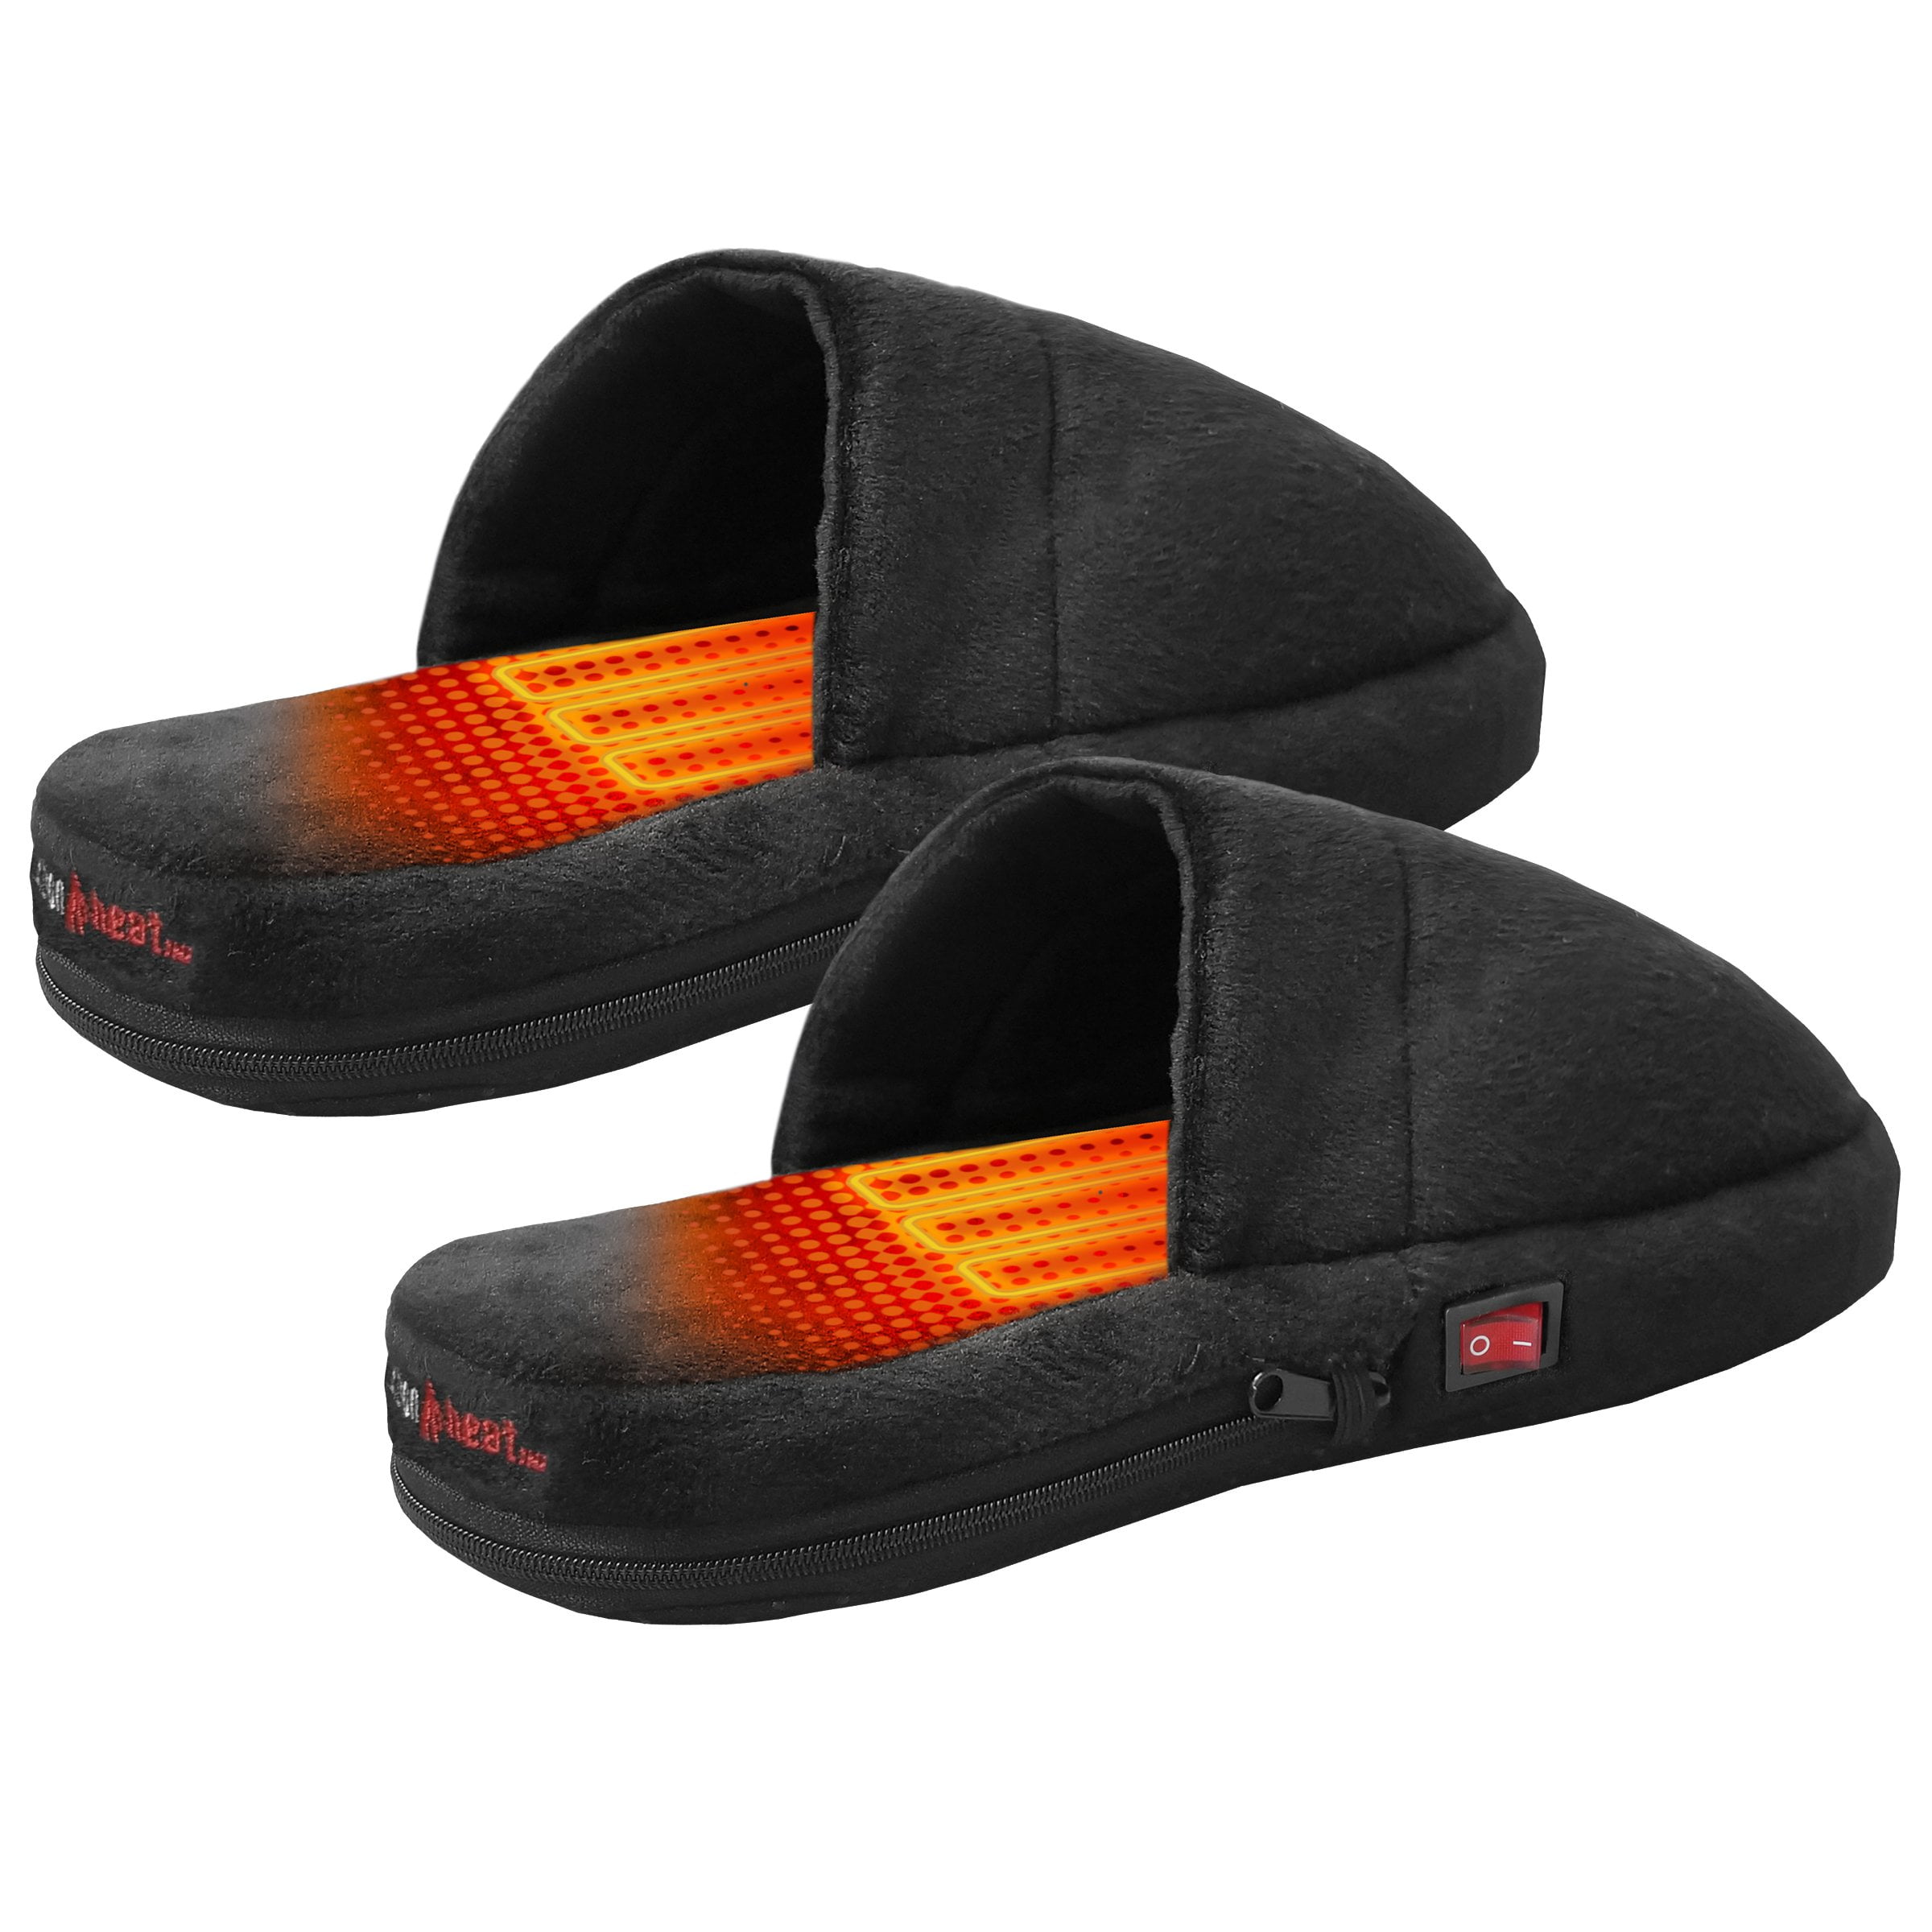 action leather arabic slippers for men| Alibaba.com-sgquangbinhtourist.com.vn